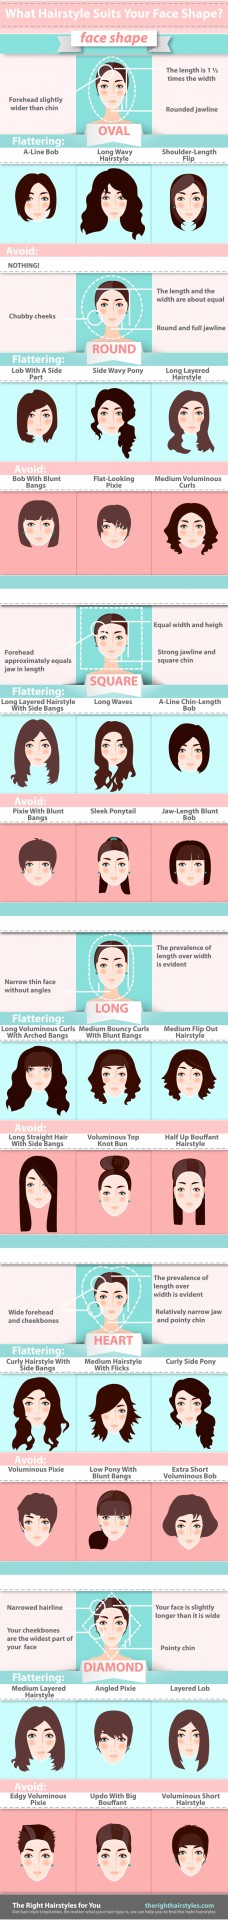 infographic on how to choose hairstyle according to face shape